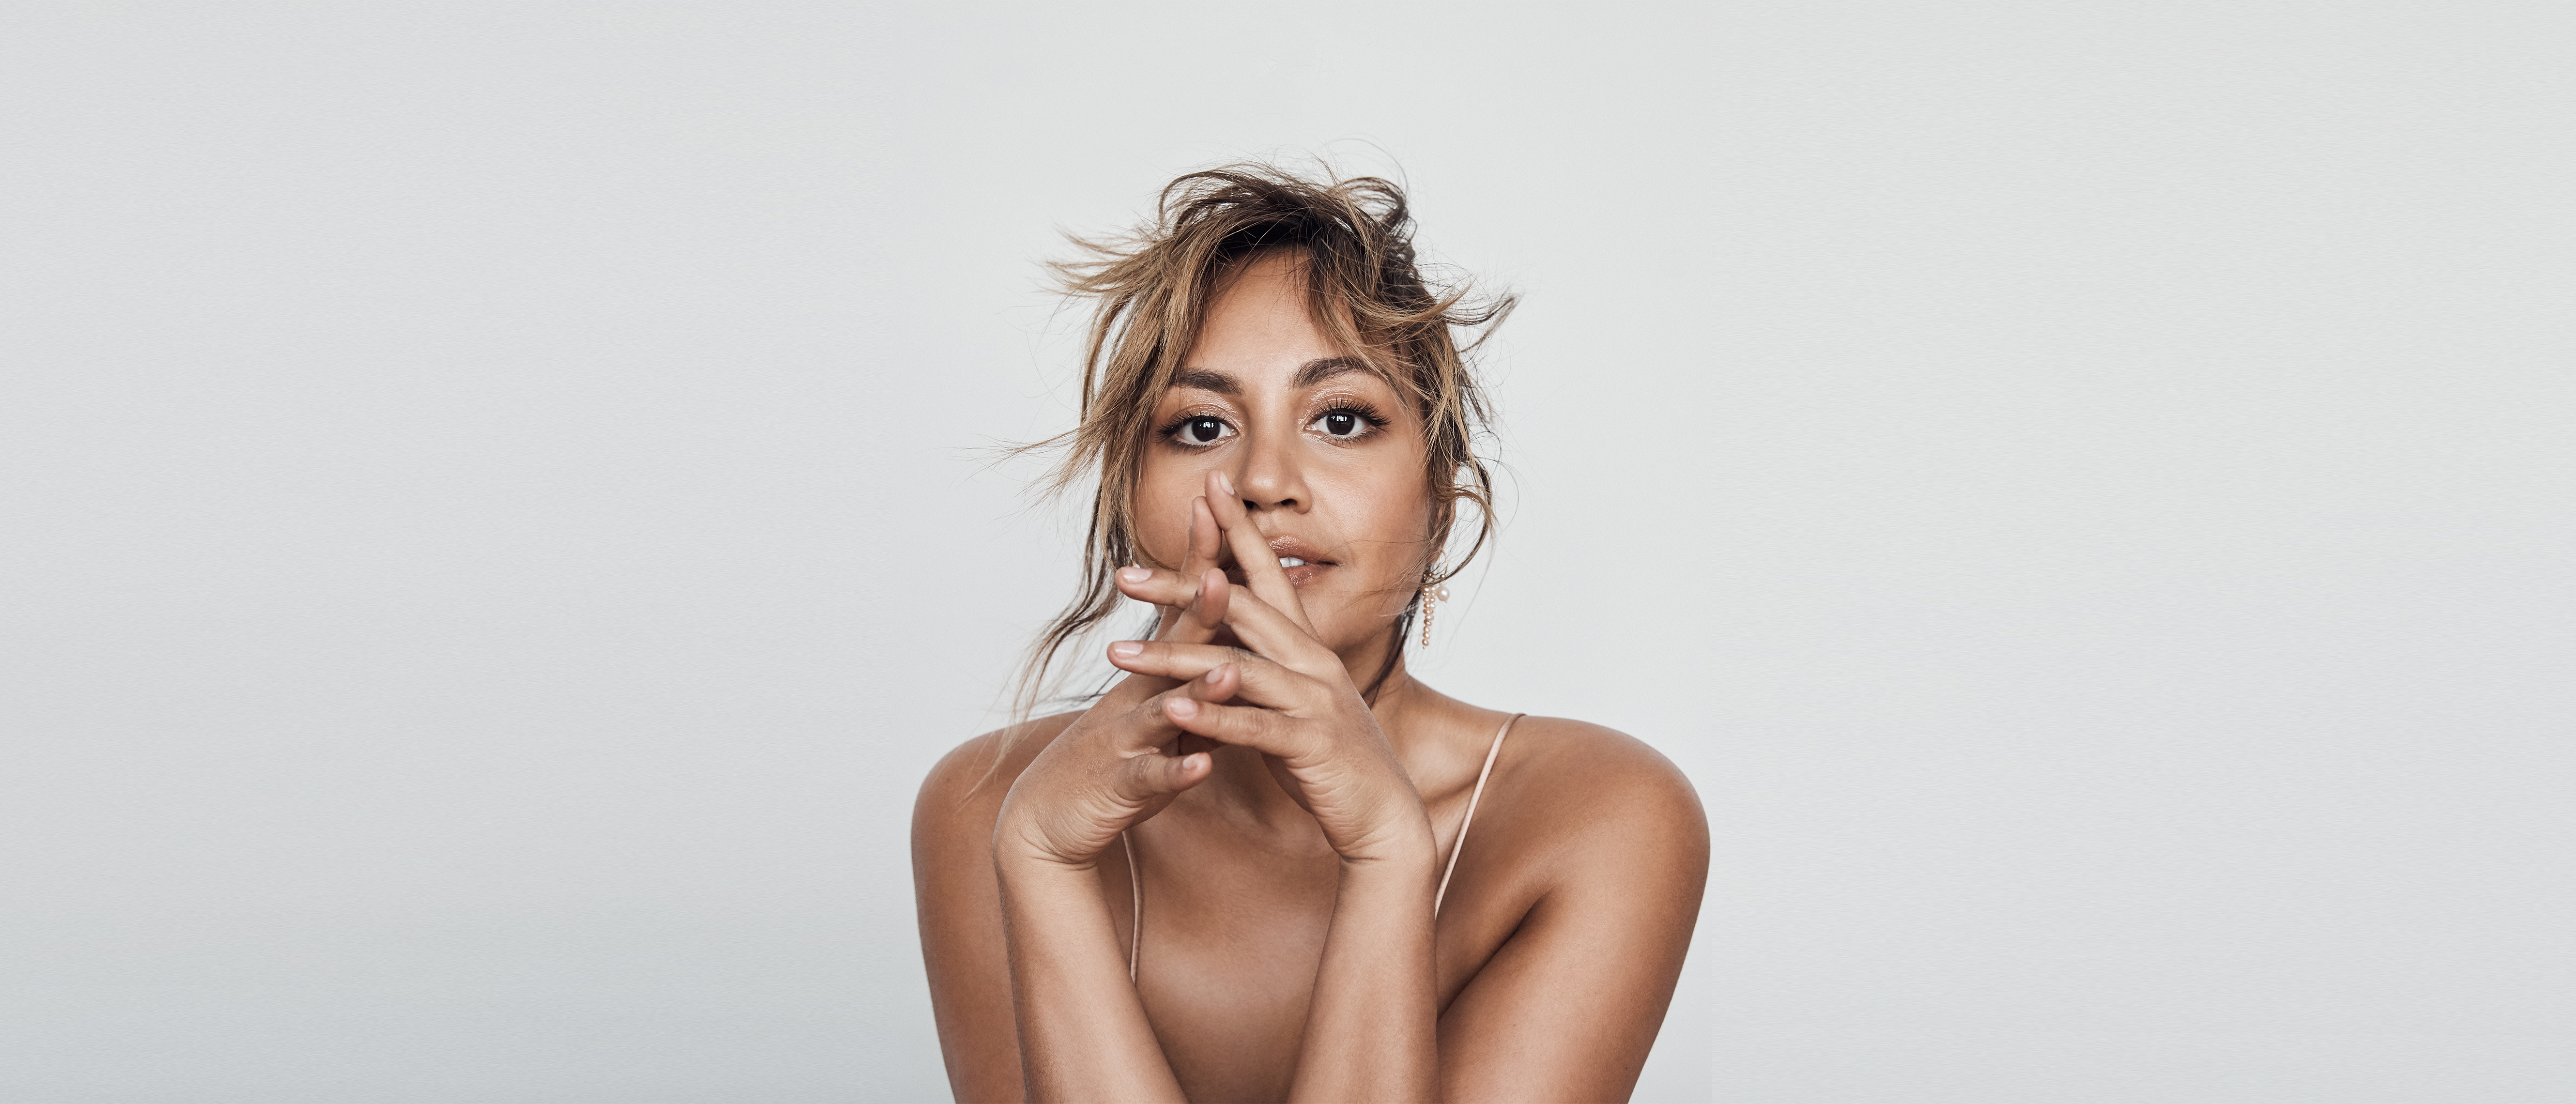 Jessica Mauboy announces New Album ‘HILDA’ and releases New Single ‘Little Things’